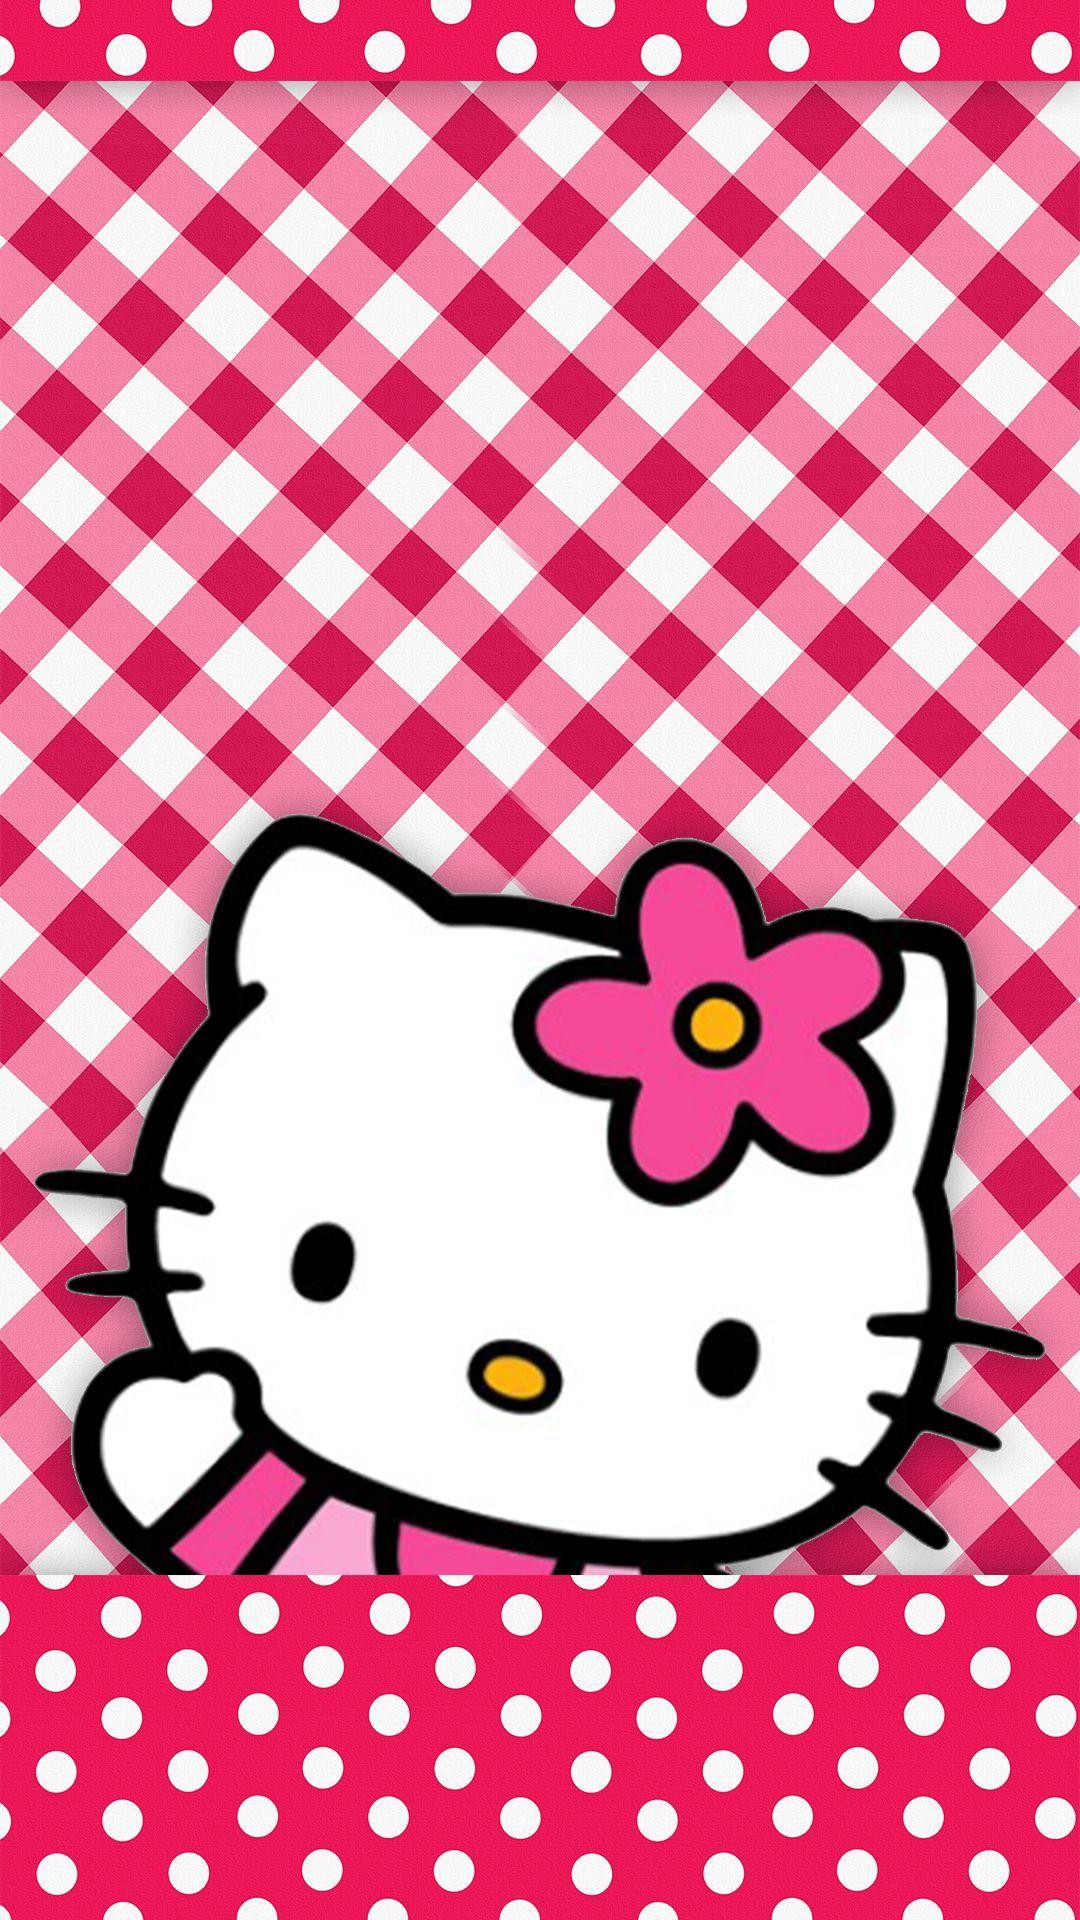 Free download Hello Kitty Wallpapers Kittify Your iPhone HD LIVE RETINACOOL  640x960 for your Desktop Mobile  Tablet  Explore 77 Cool Hello Kitty  Wallpapers  Hello Kitty Backgrounds Background Hello Kitty